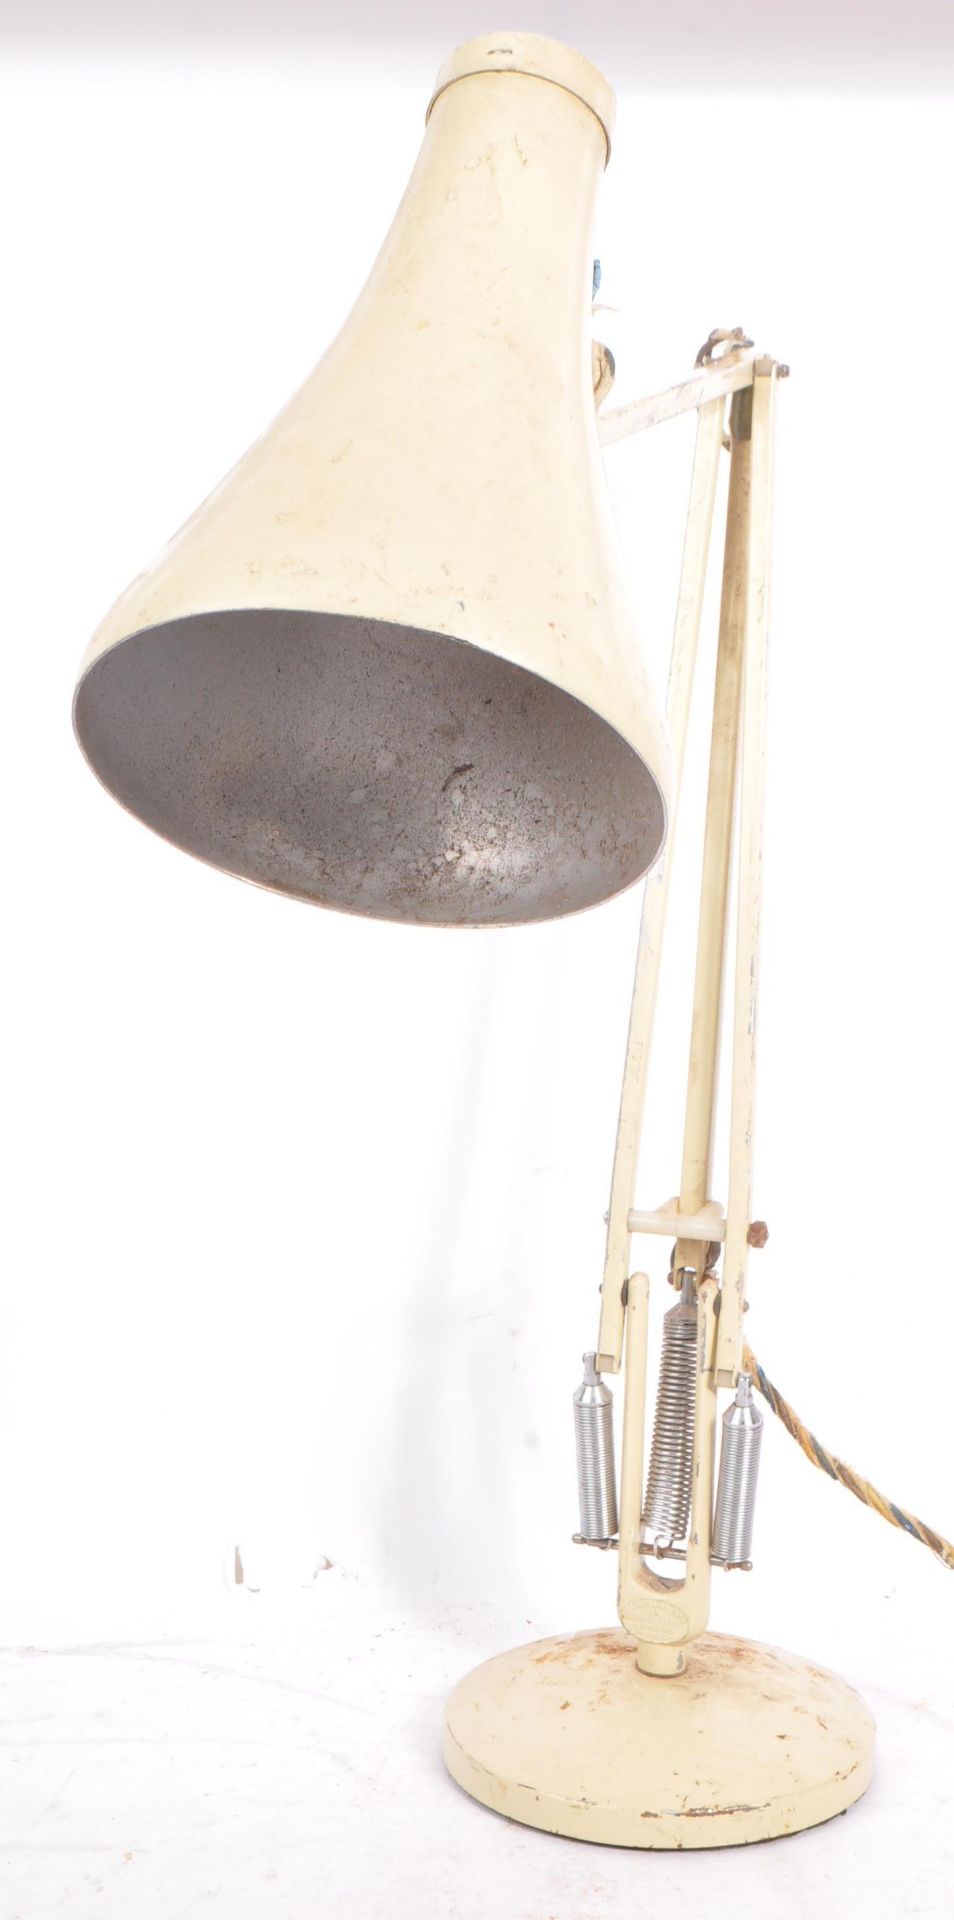 MID 20TH CENTURY ANGLEPOISE DESK LAMP - Image 2 of 7